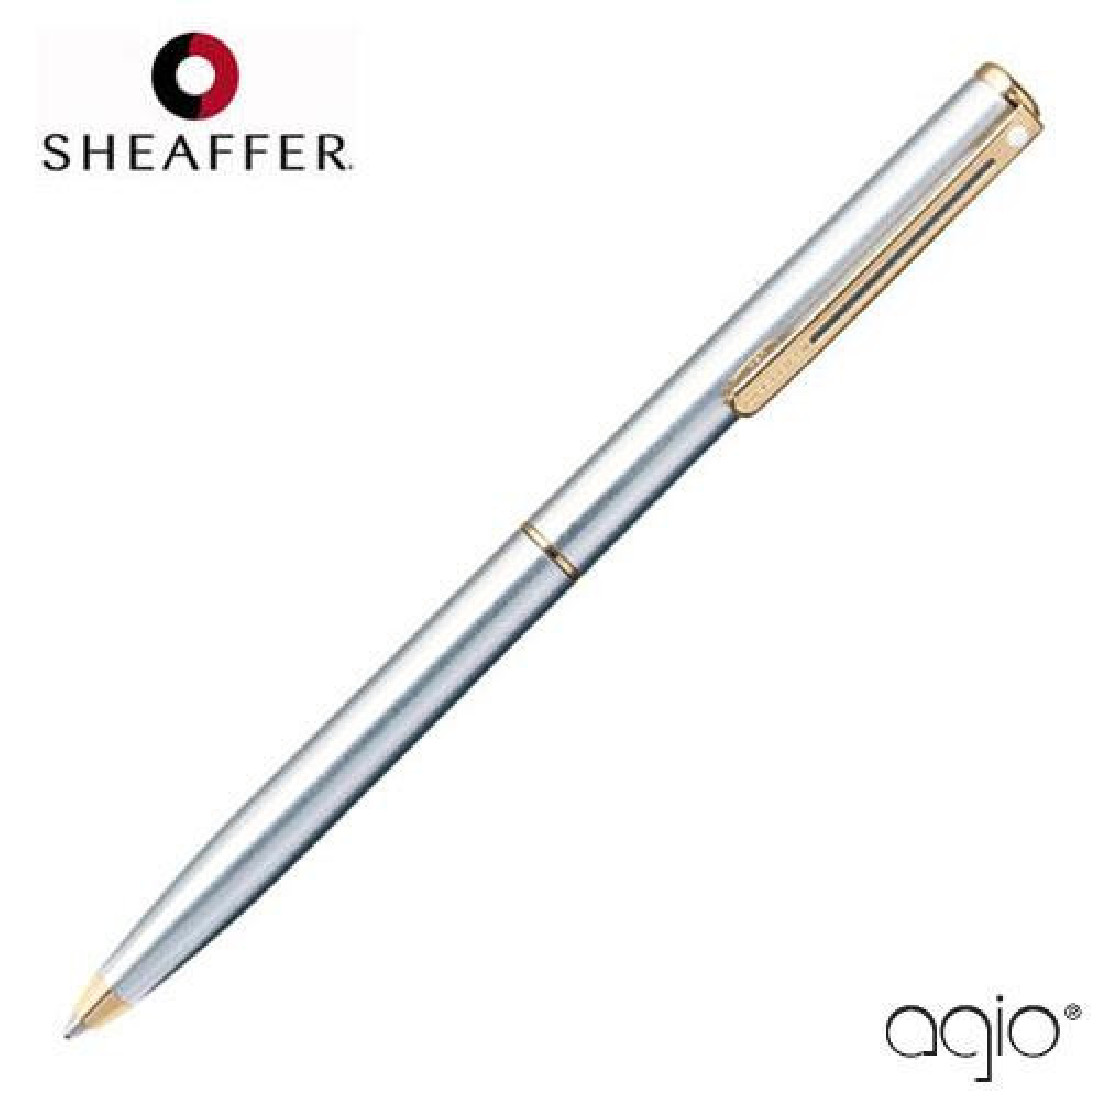 Sheaffer Agio Brushed Chrome Plate Finish 453-2 with 22K Gold Plate Trim Ballpoint Pen